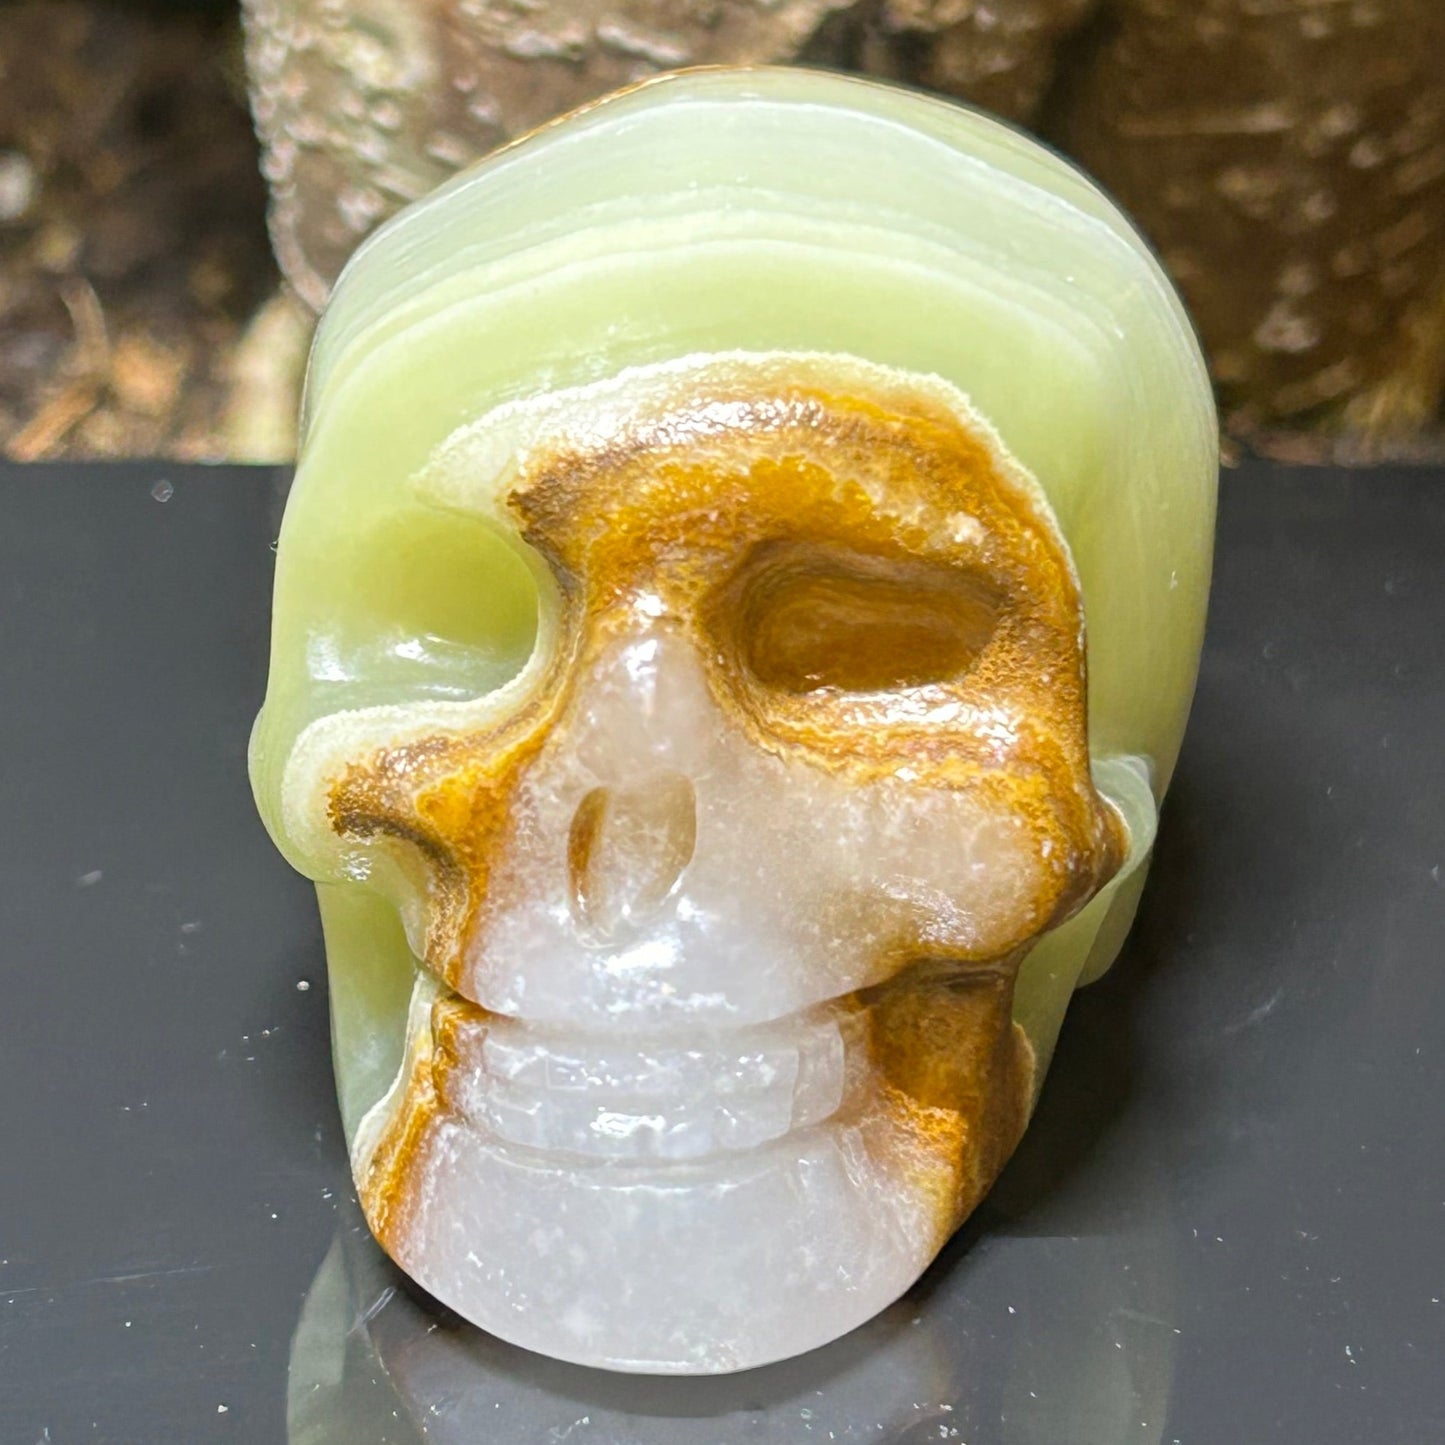 Green banded calcite Skull Carving